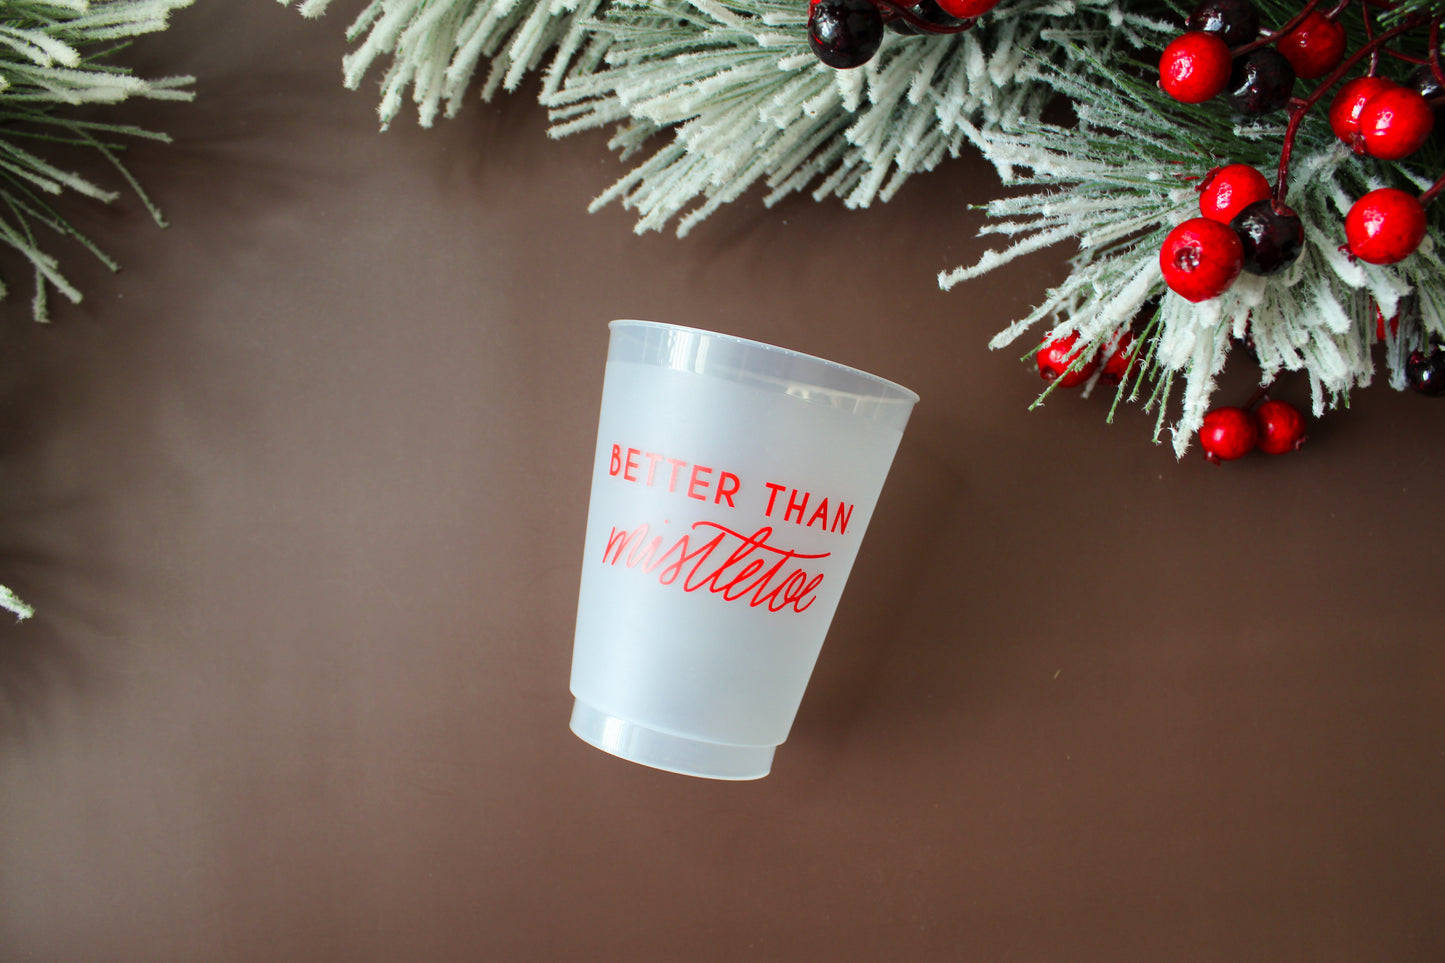 holiday cocktails, 'Better Than Mistletoe party cup. holiday party, hostess gift